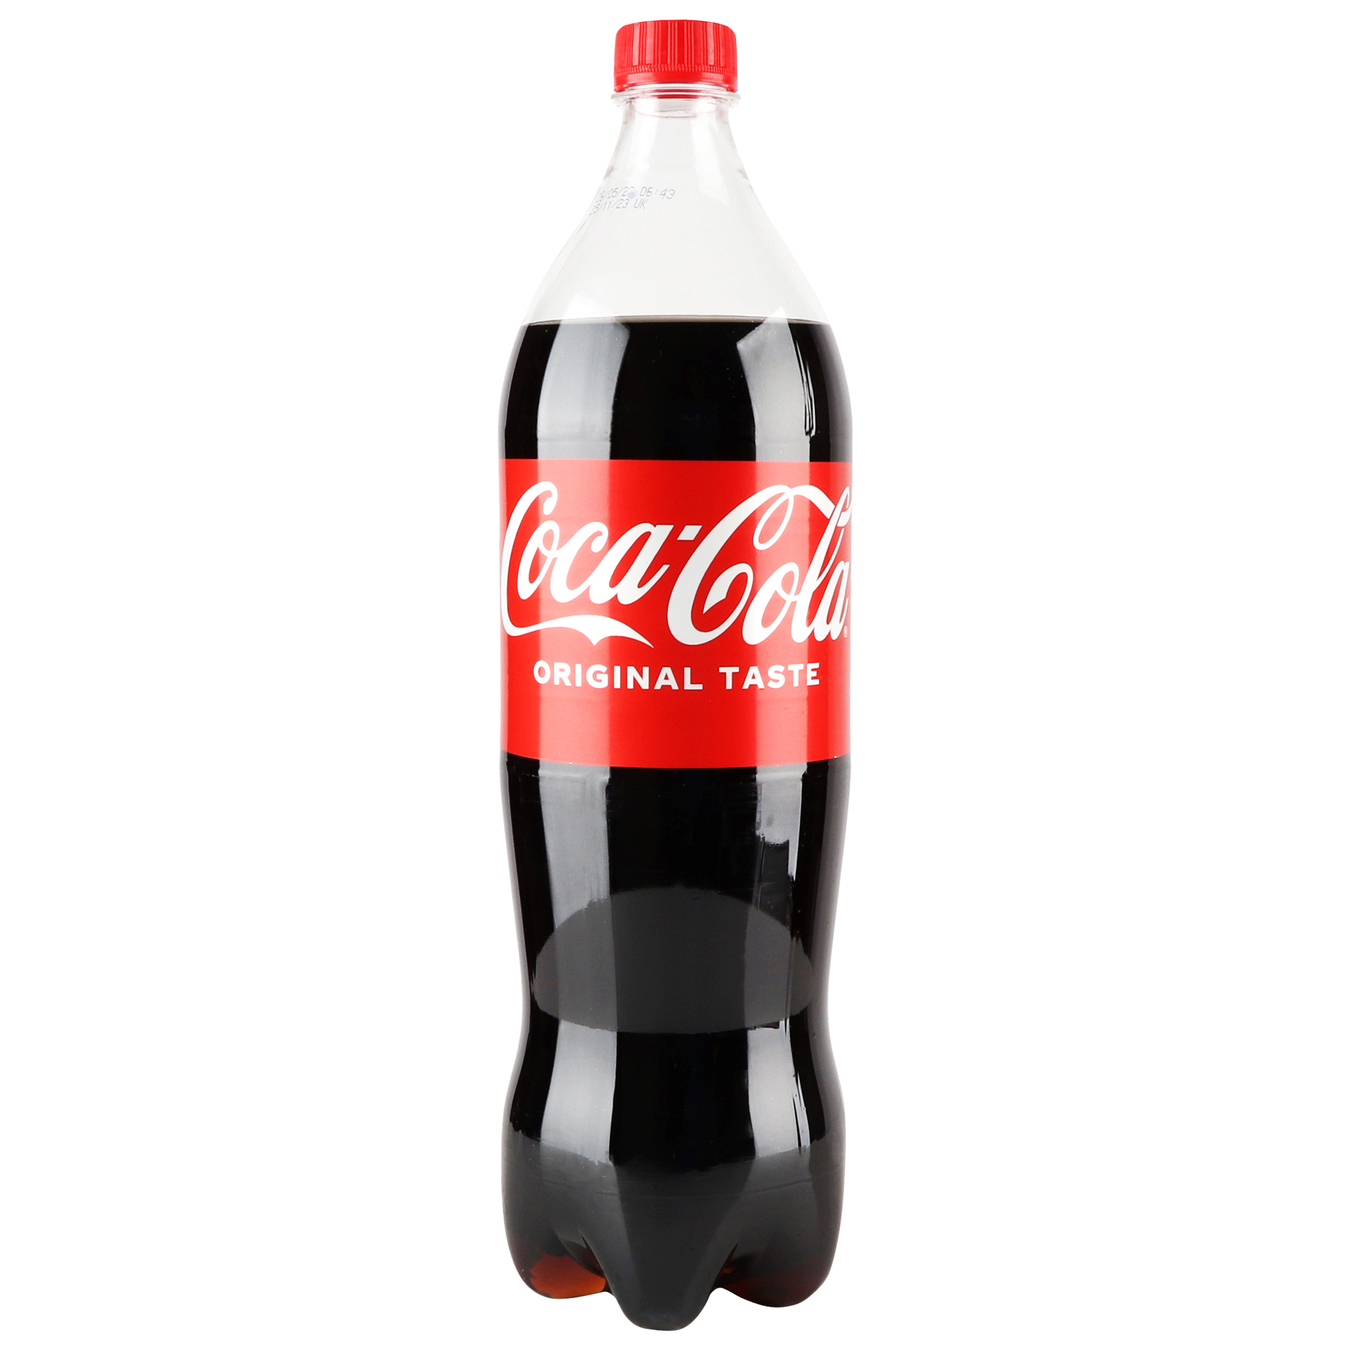 Coca-Cola highly carbonated drink 1.25 l PET